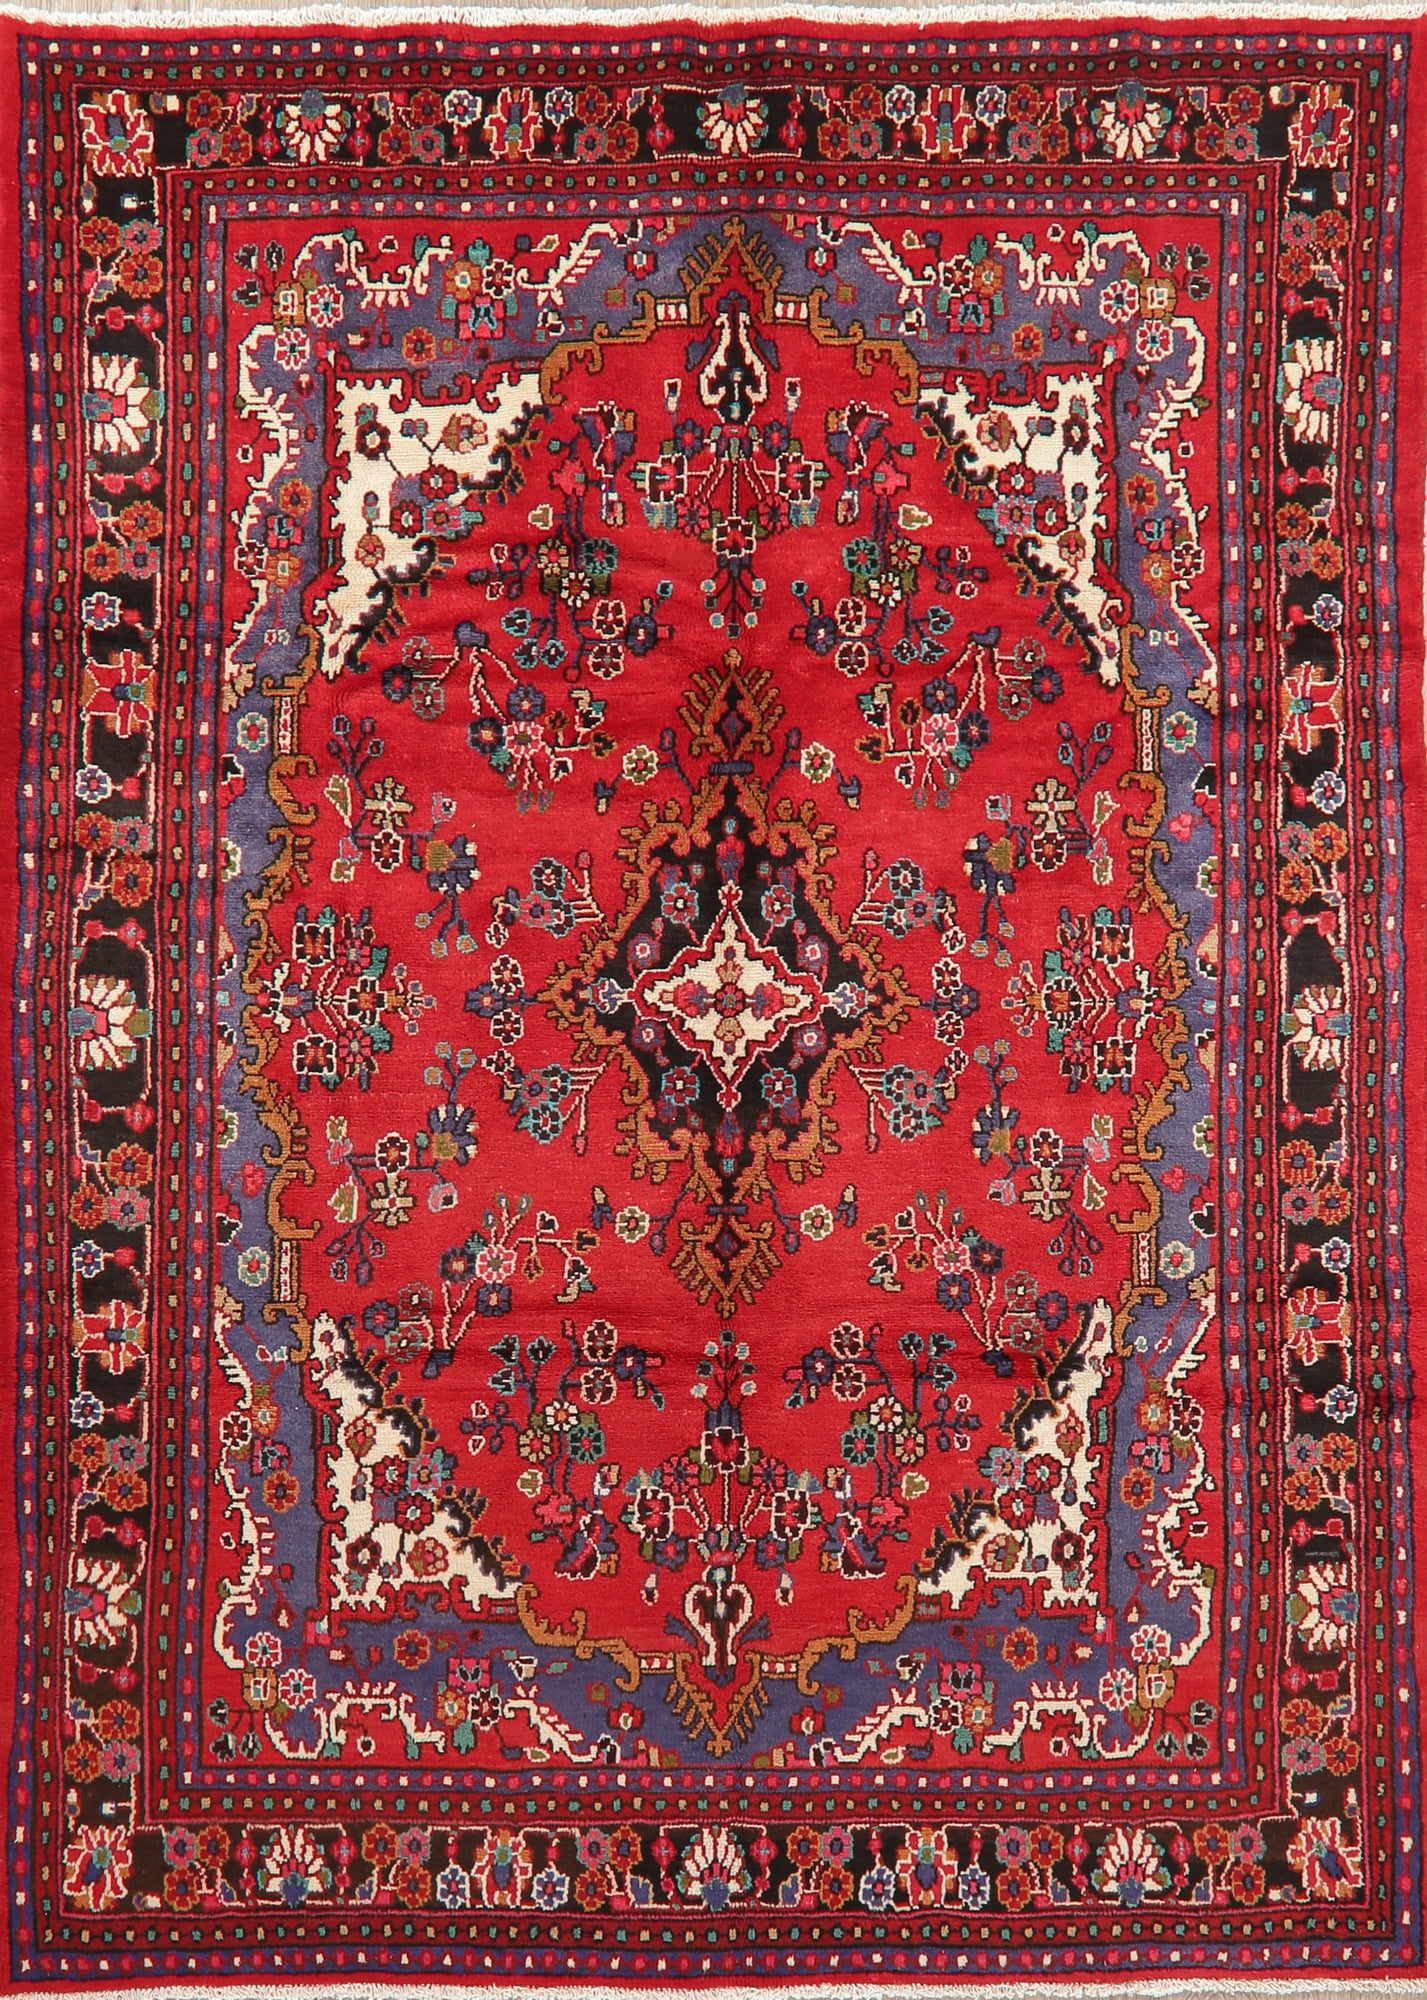 BLACK FRIDAY DEAL Floral Red Hamedan Oriental Wool Hand-Knotted Area Rug Room Size Carpet 7x10 ...